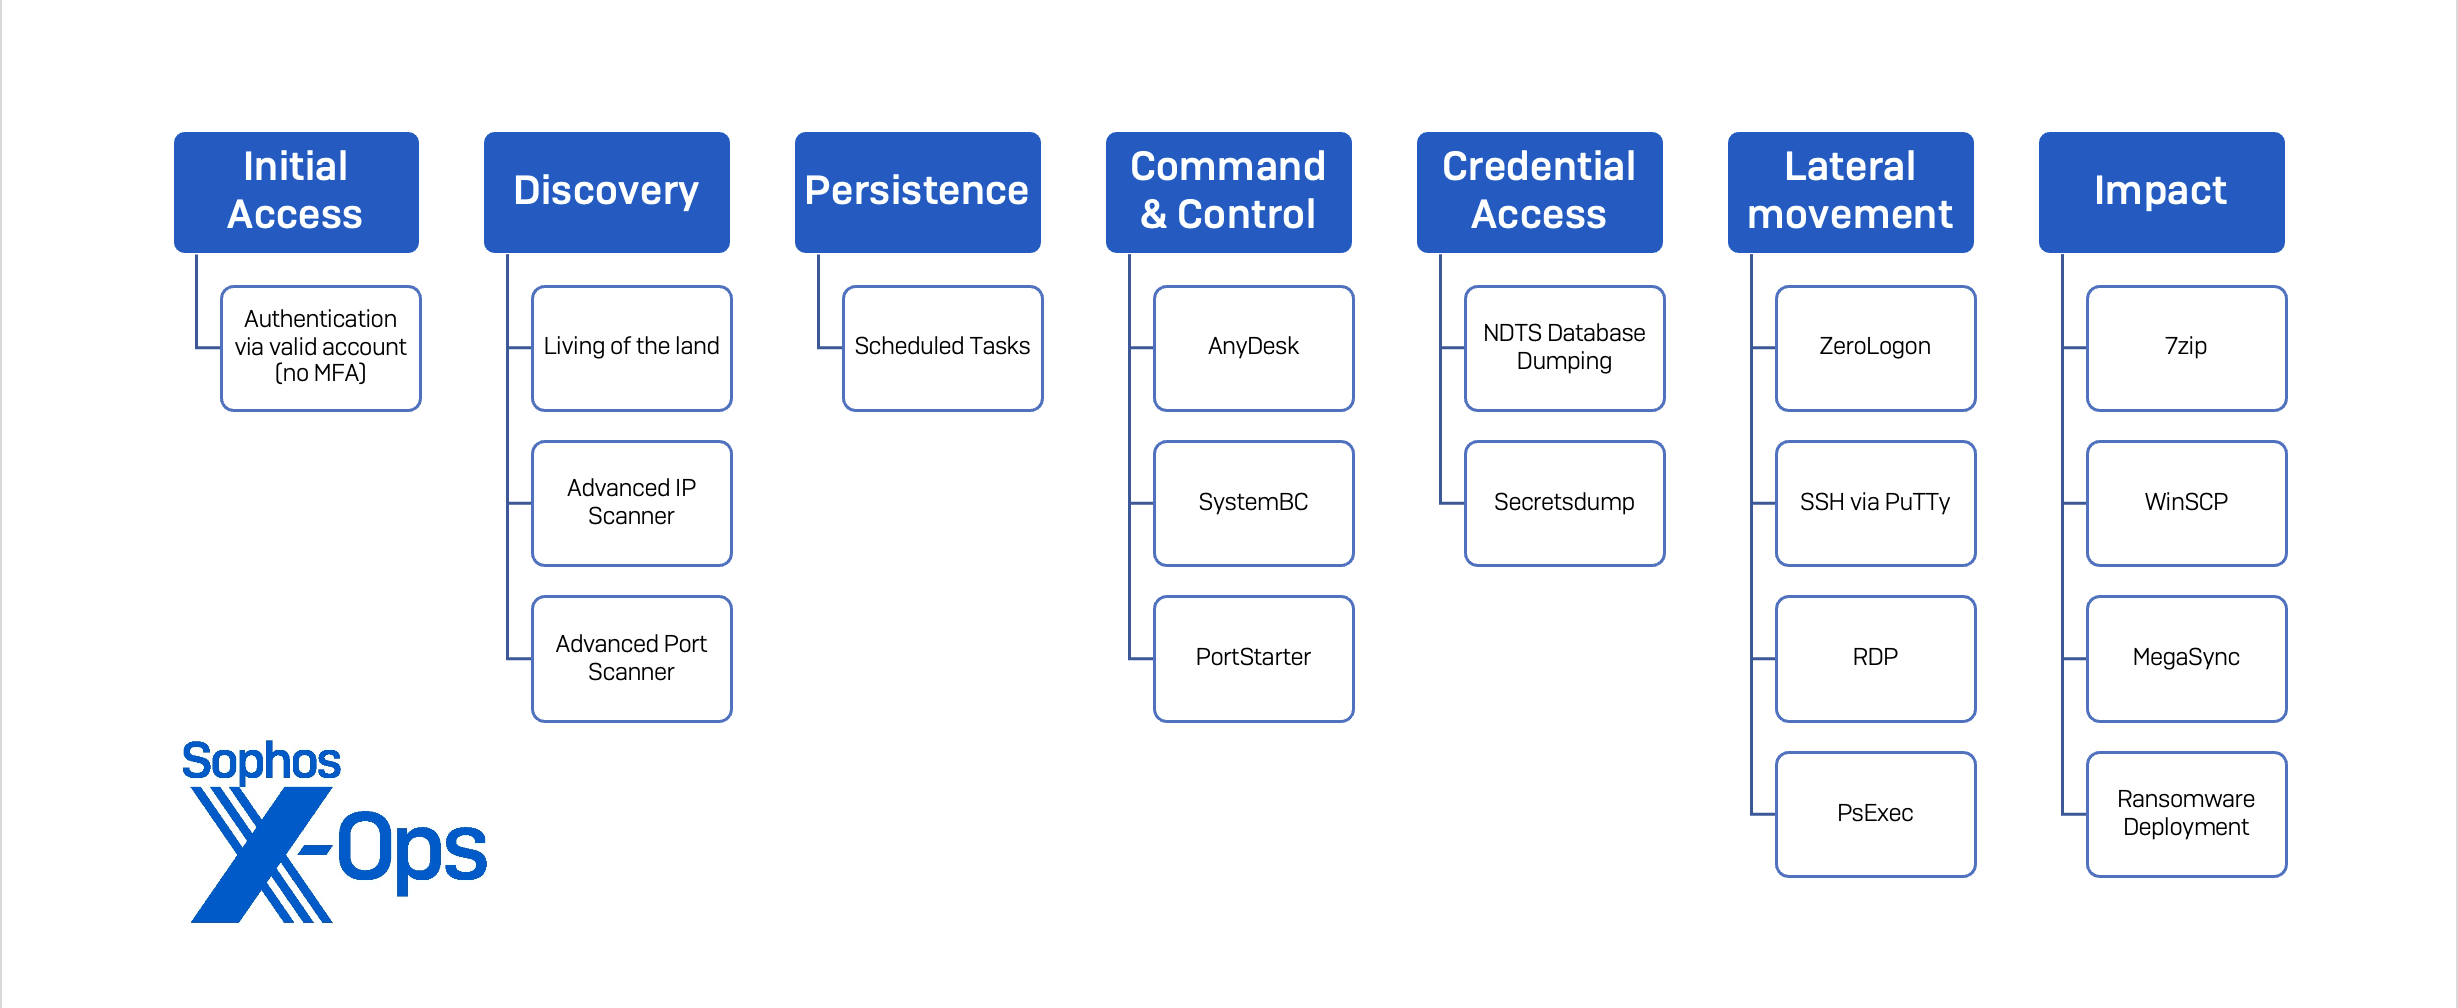 A chart mapping 18 IoCs to MITR ATT&CK's Initial Access, Discovery, Persistence, Command and Control, Credential Access, Lateral Movement, and Impact categories